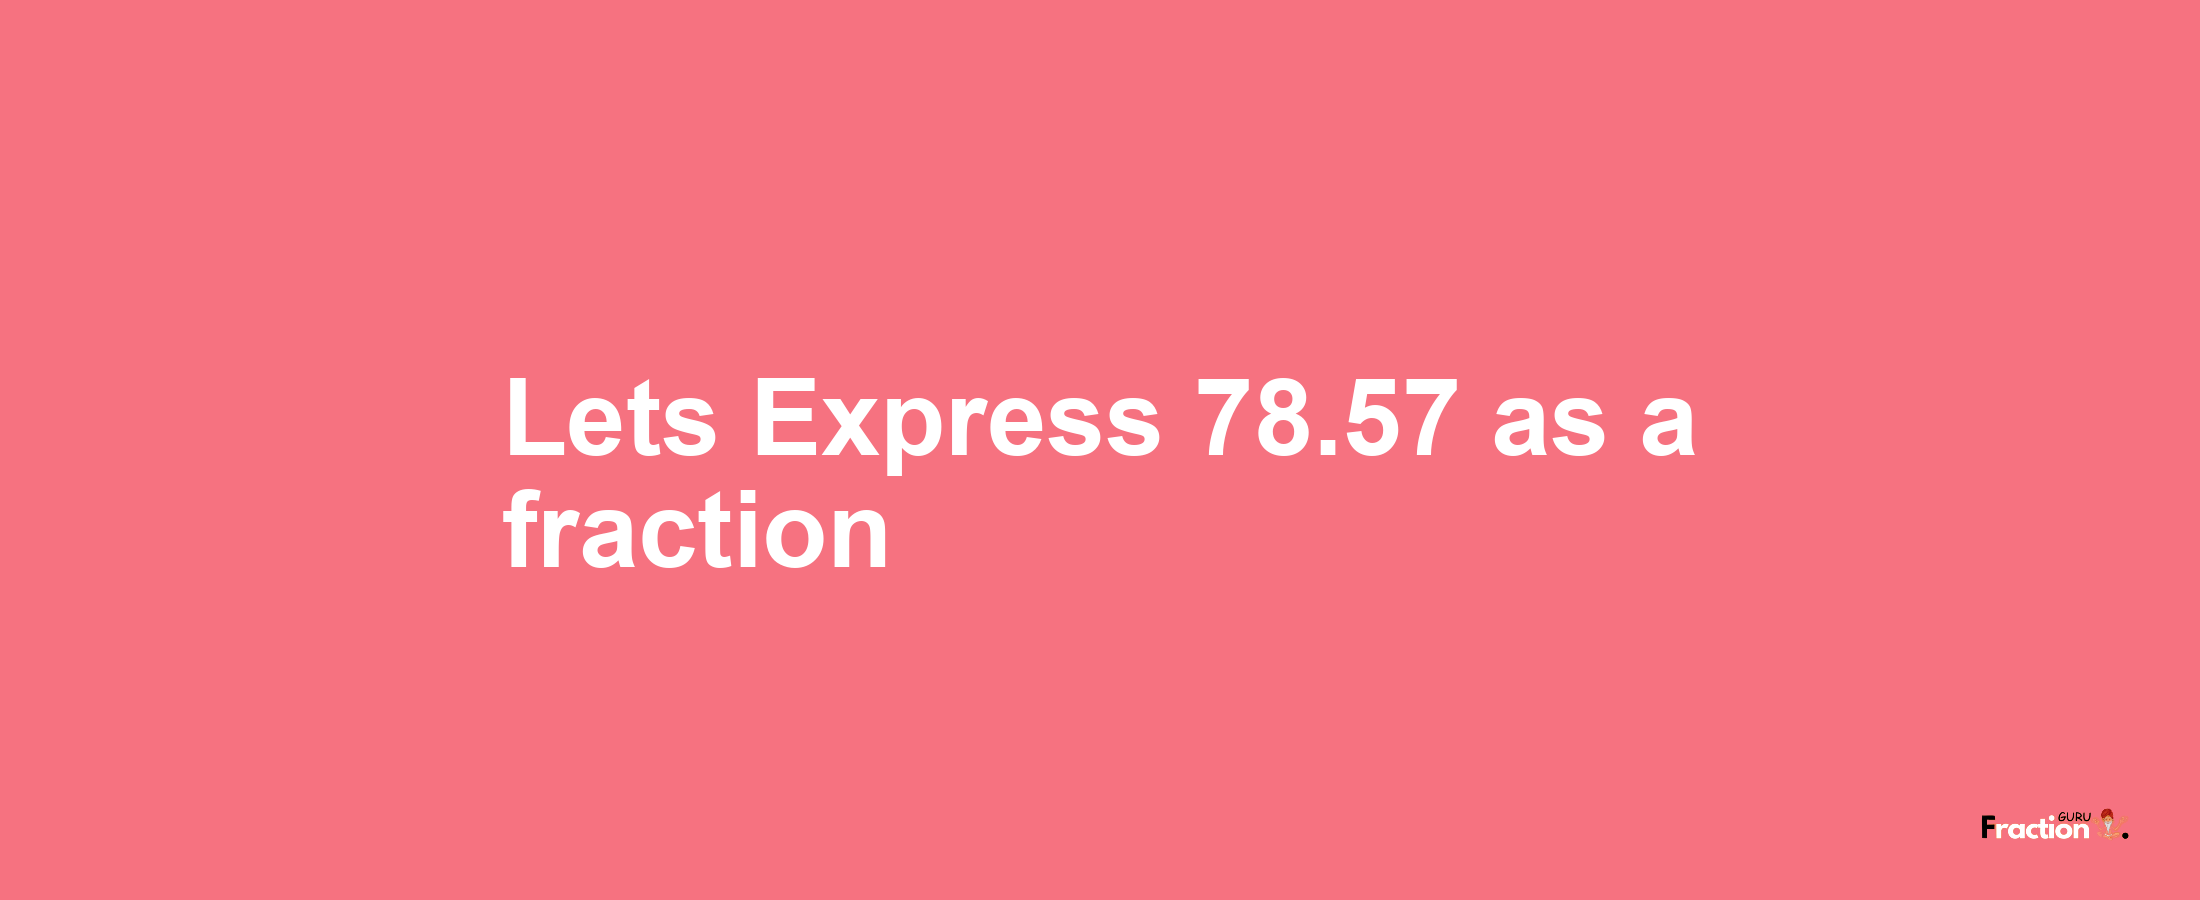 Lets Express 78.57 as afraction